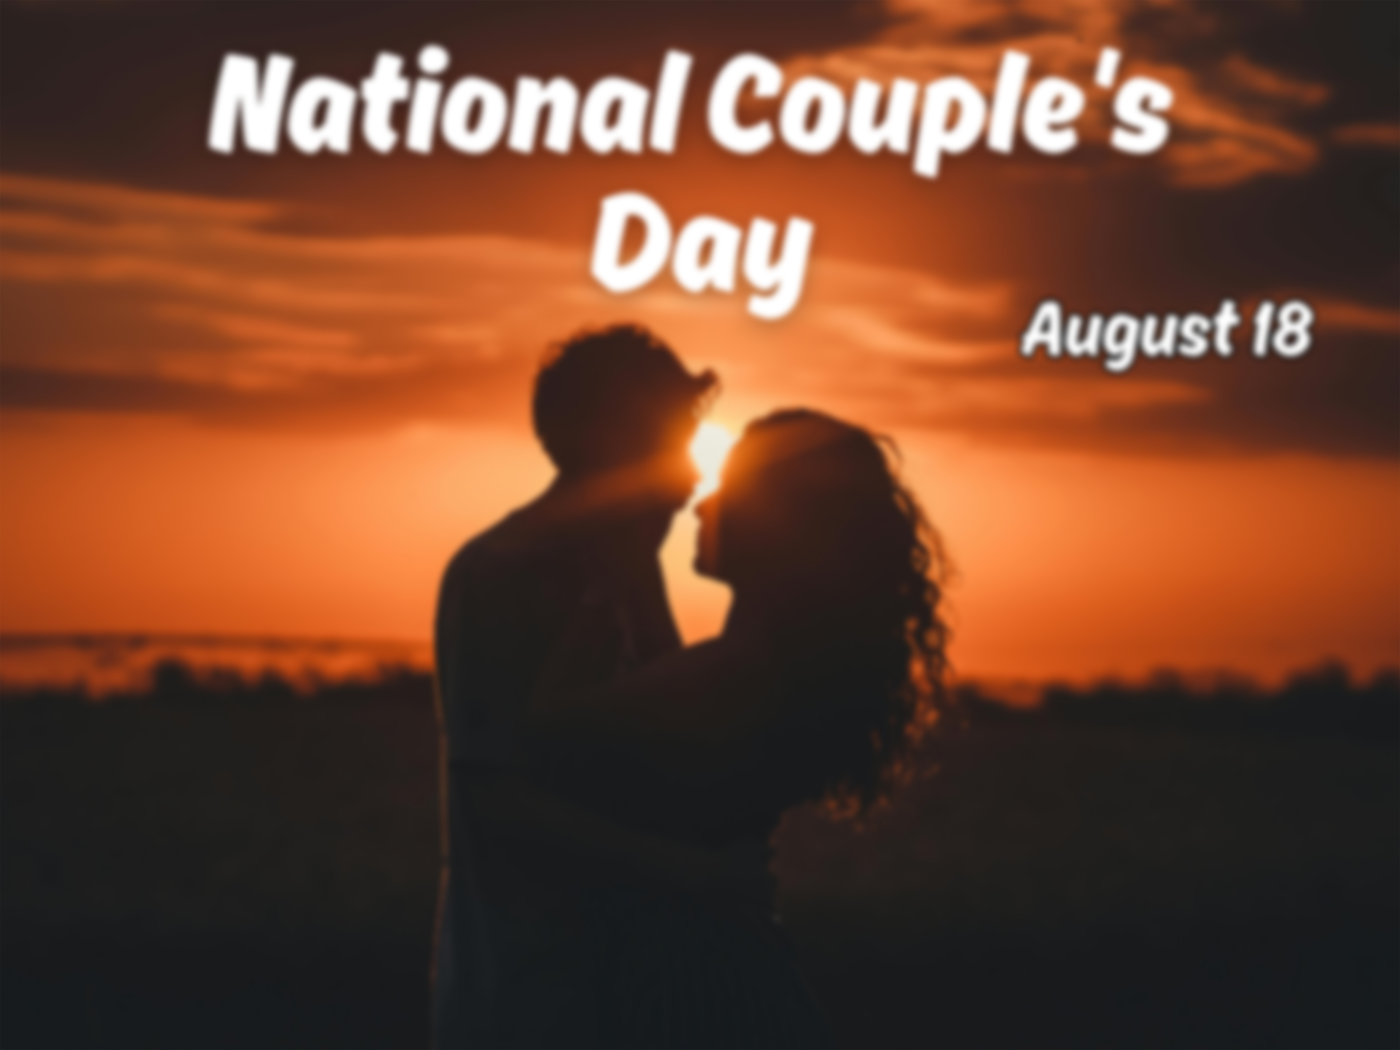 National Couple's Day